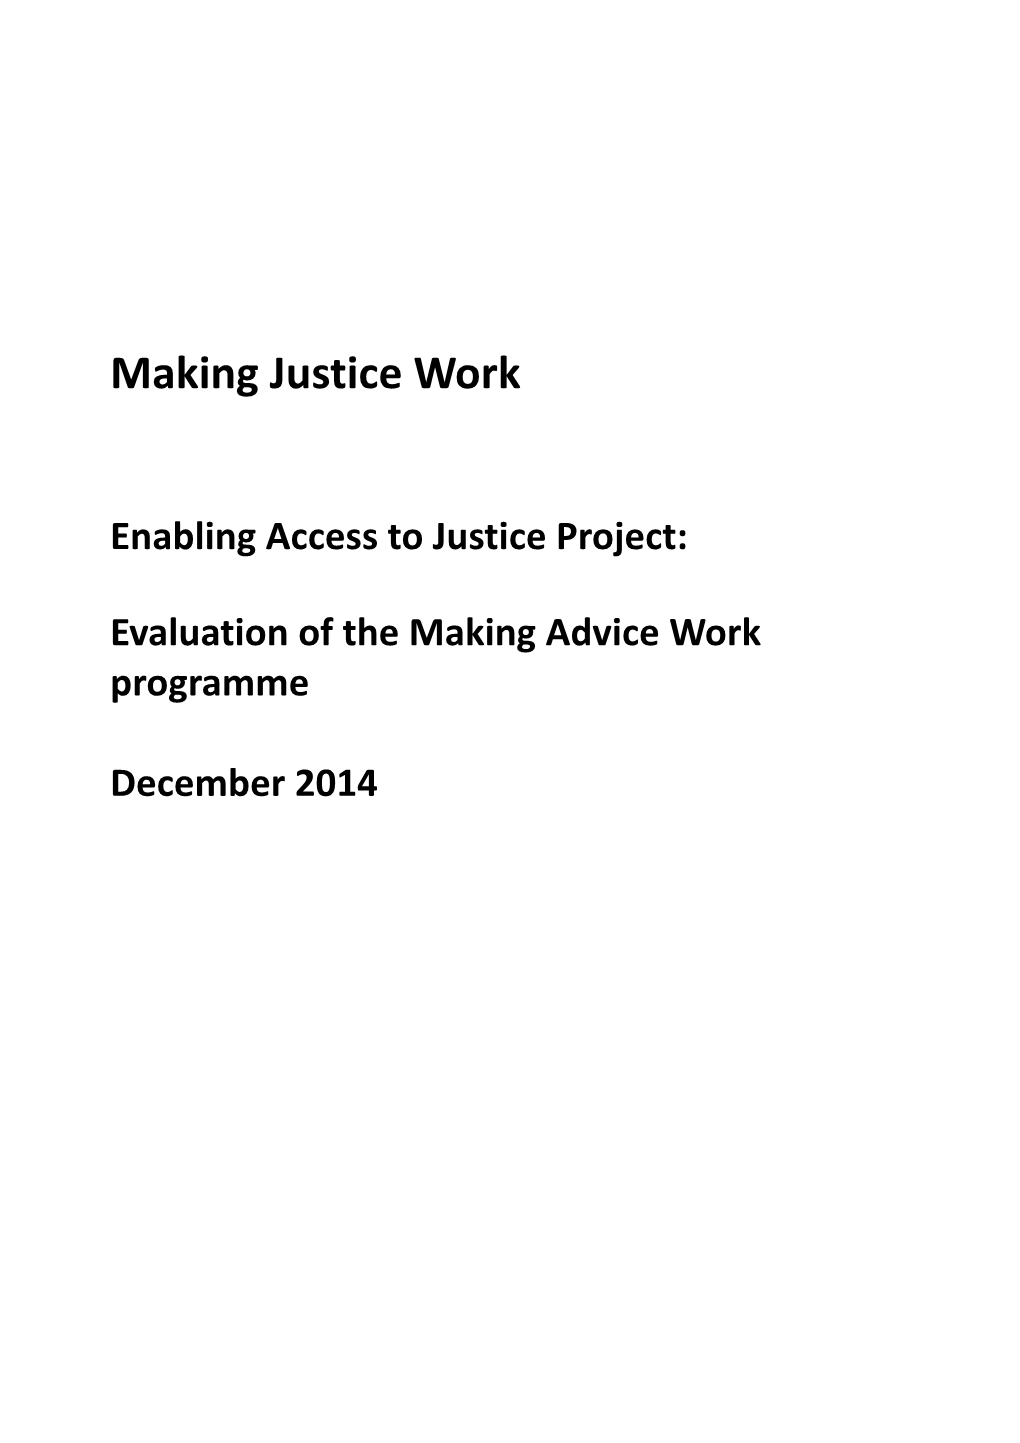 Enabling Access to Justice Project